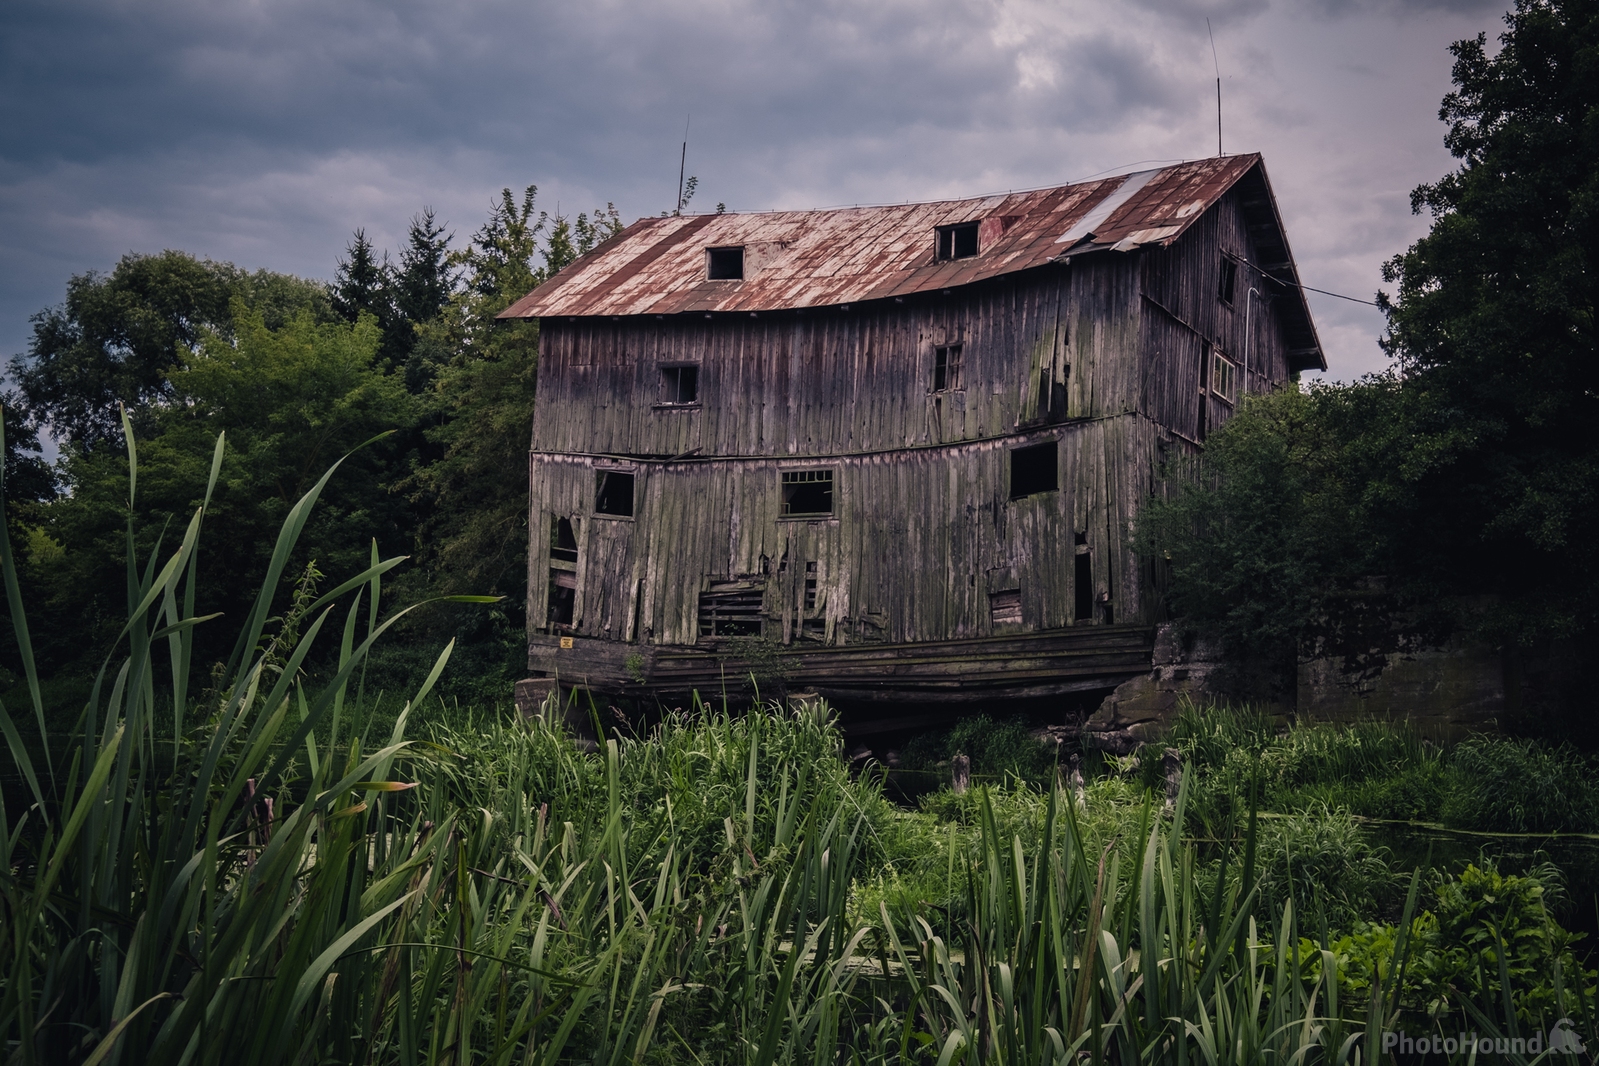 Image of Old Mill / Stary młyn in Joniec by Cezary K. Morga